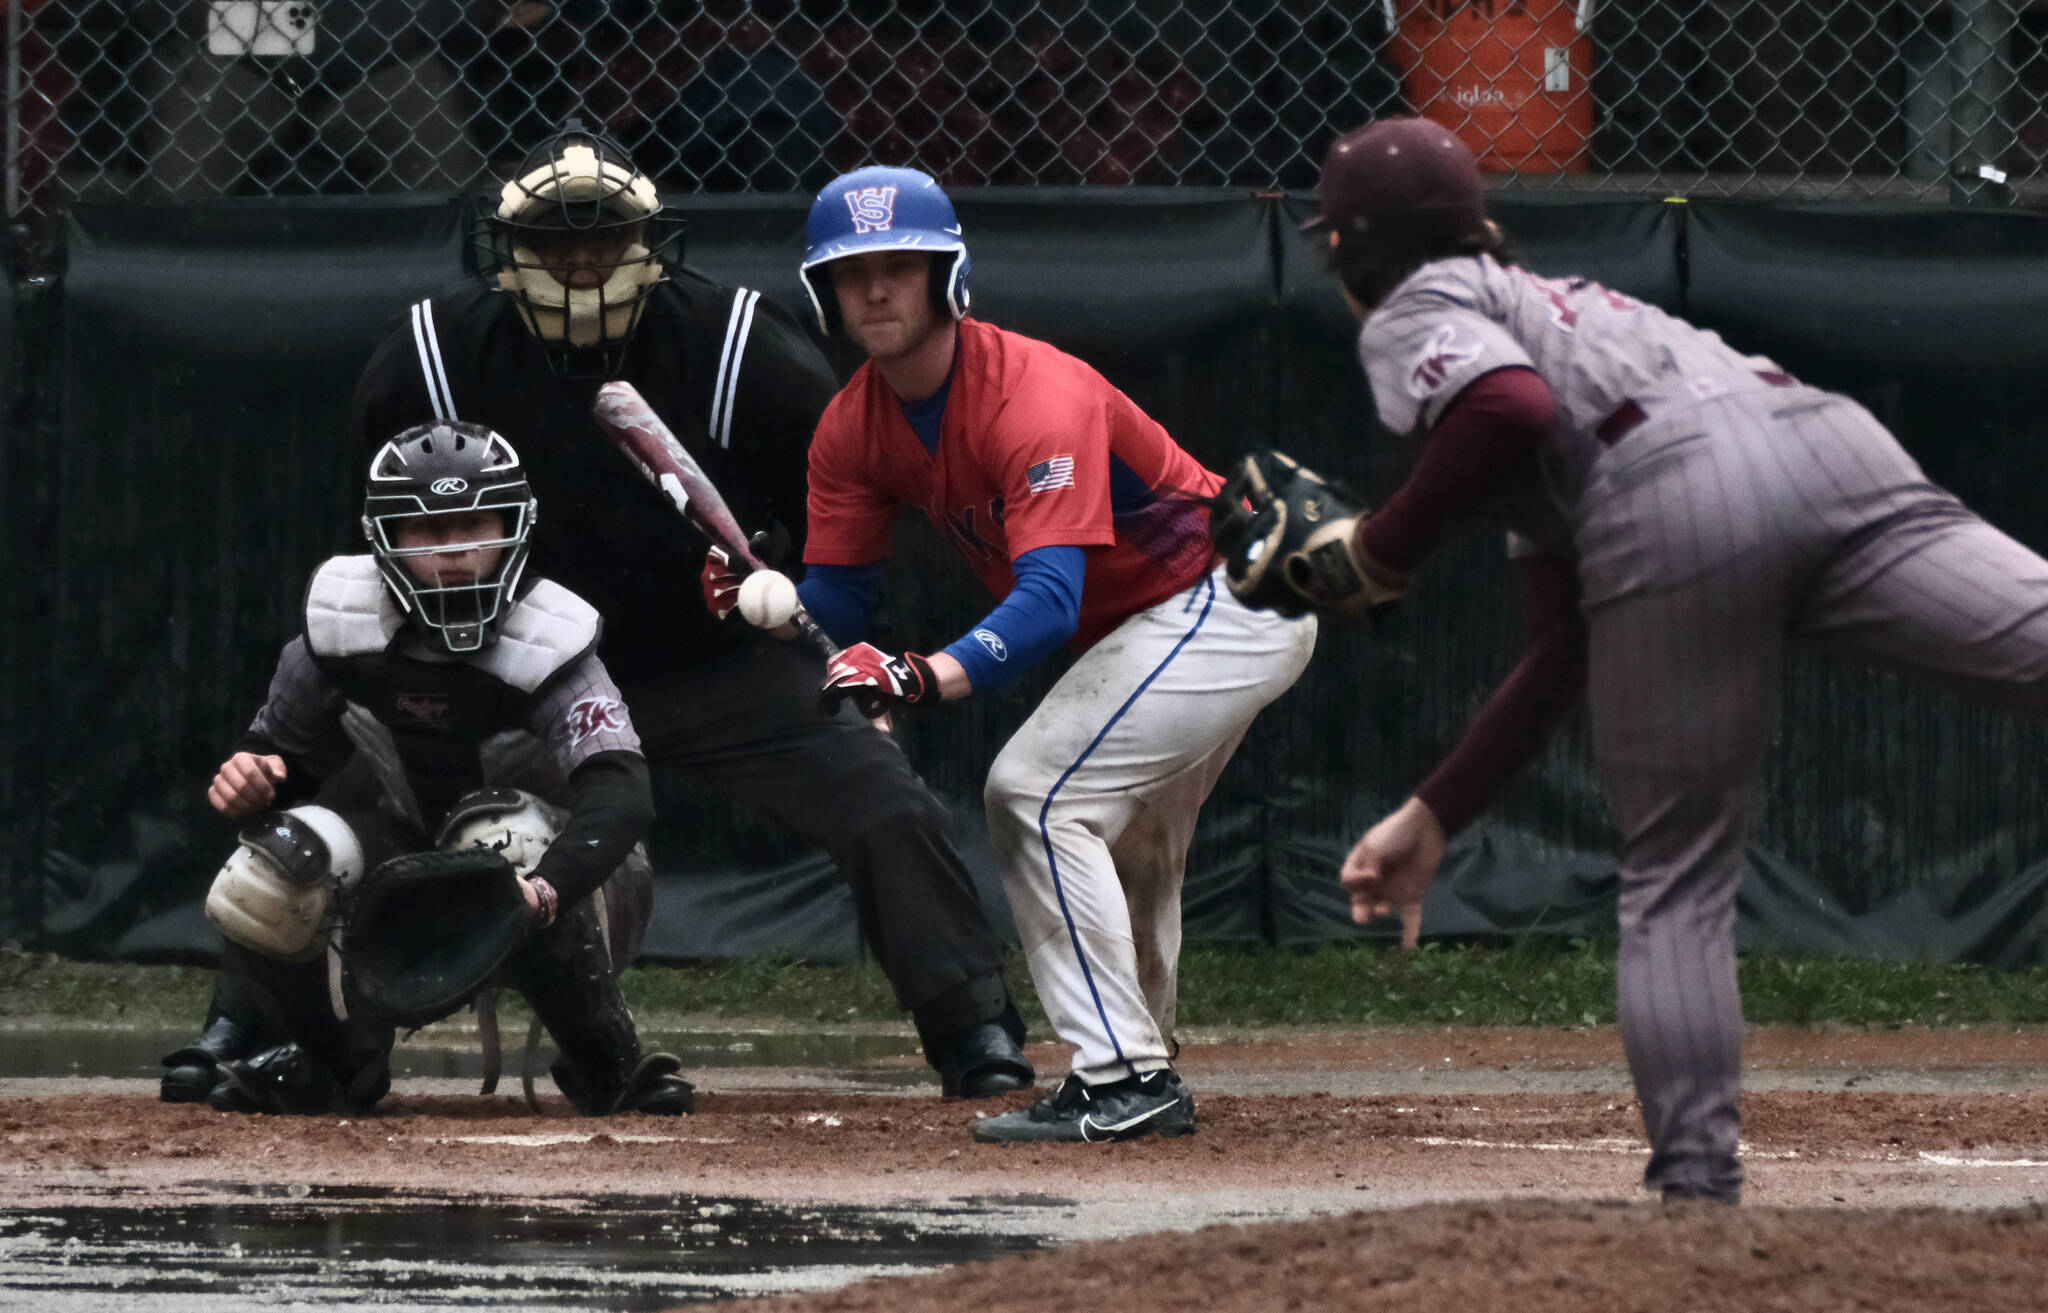 The Sitka Wolves defeated the Ketchikan Kings for the Region V Baseball Championship on Saturday on at Adair Kennedy Field. The ASAA State Baseball Championships are June 1-3 on Sitka’s Moller Field.